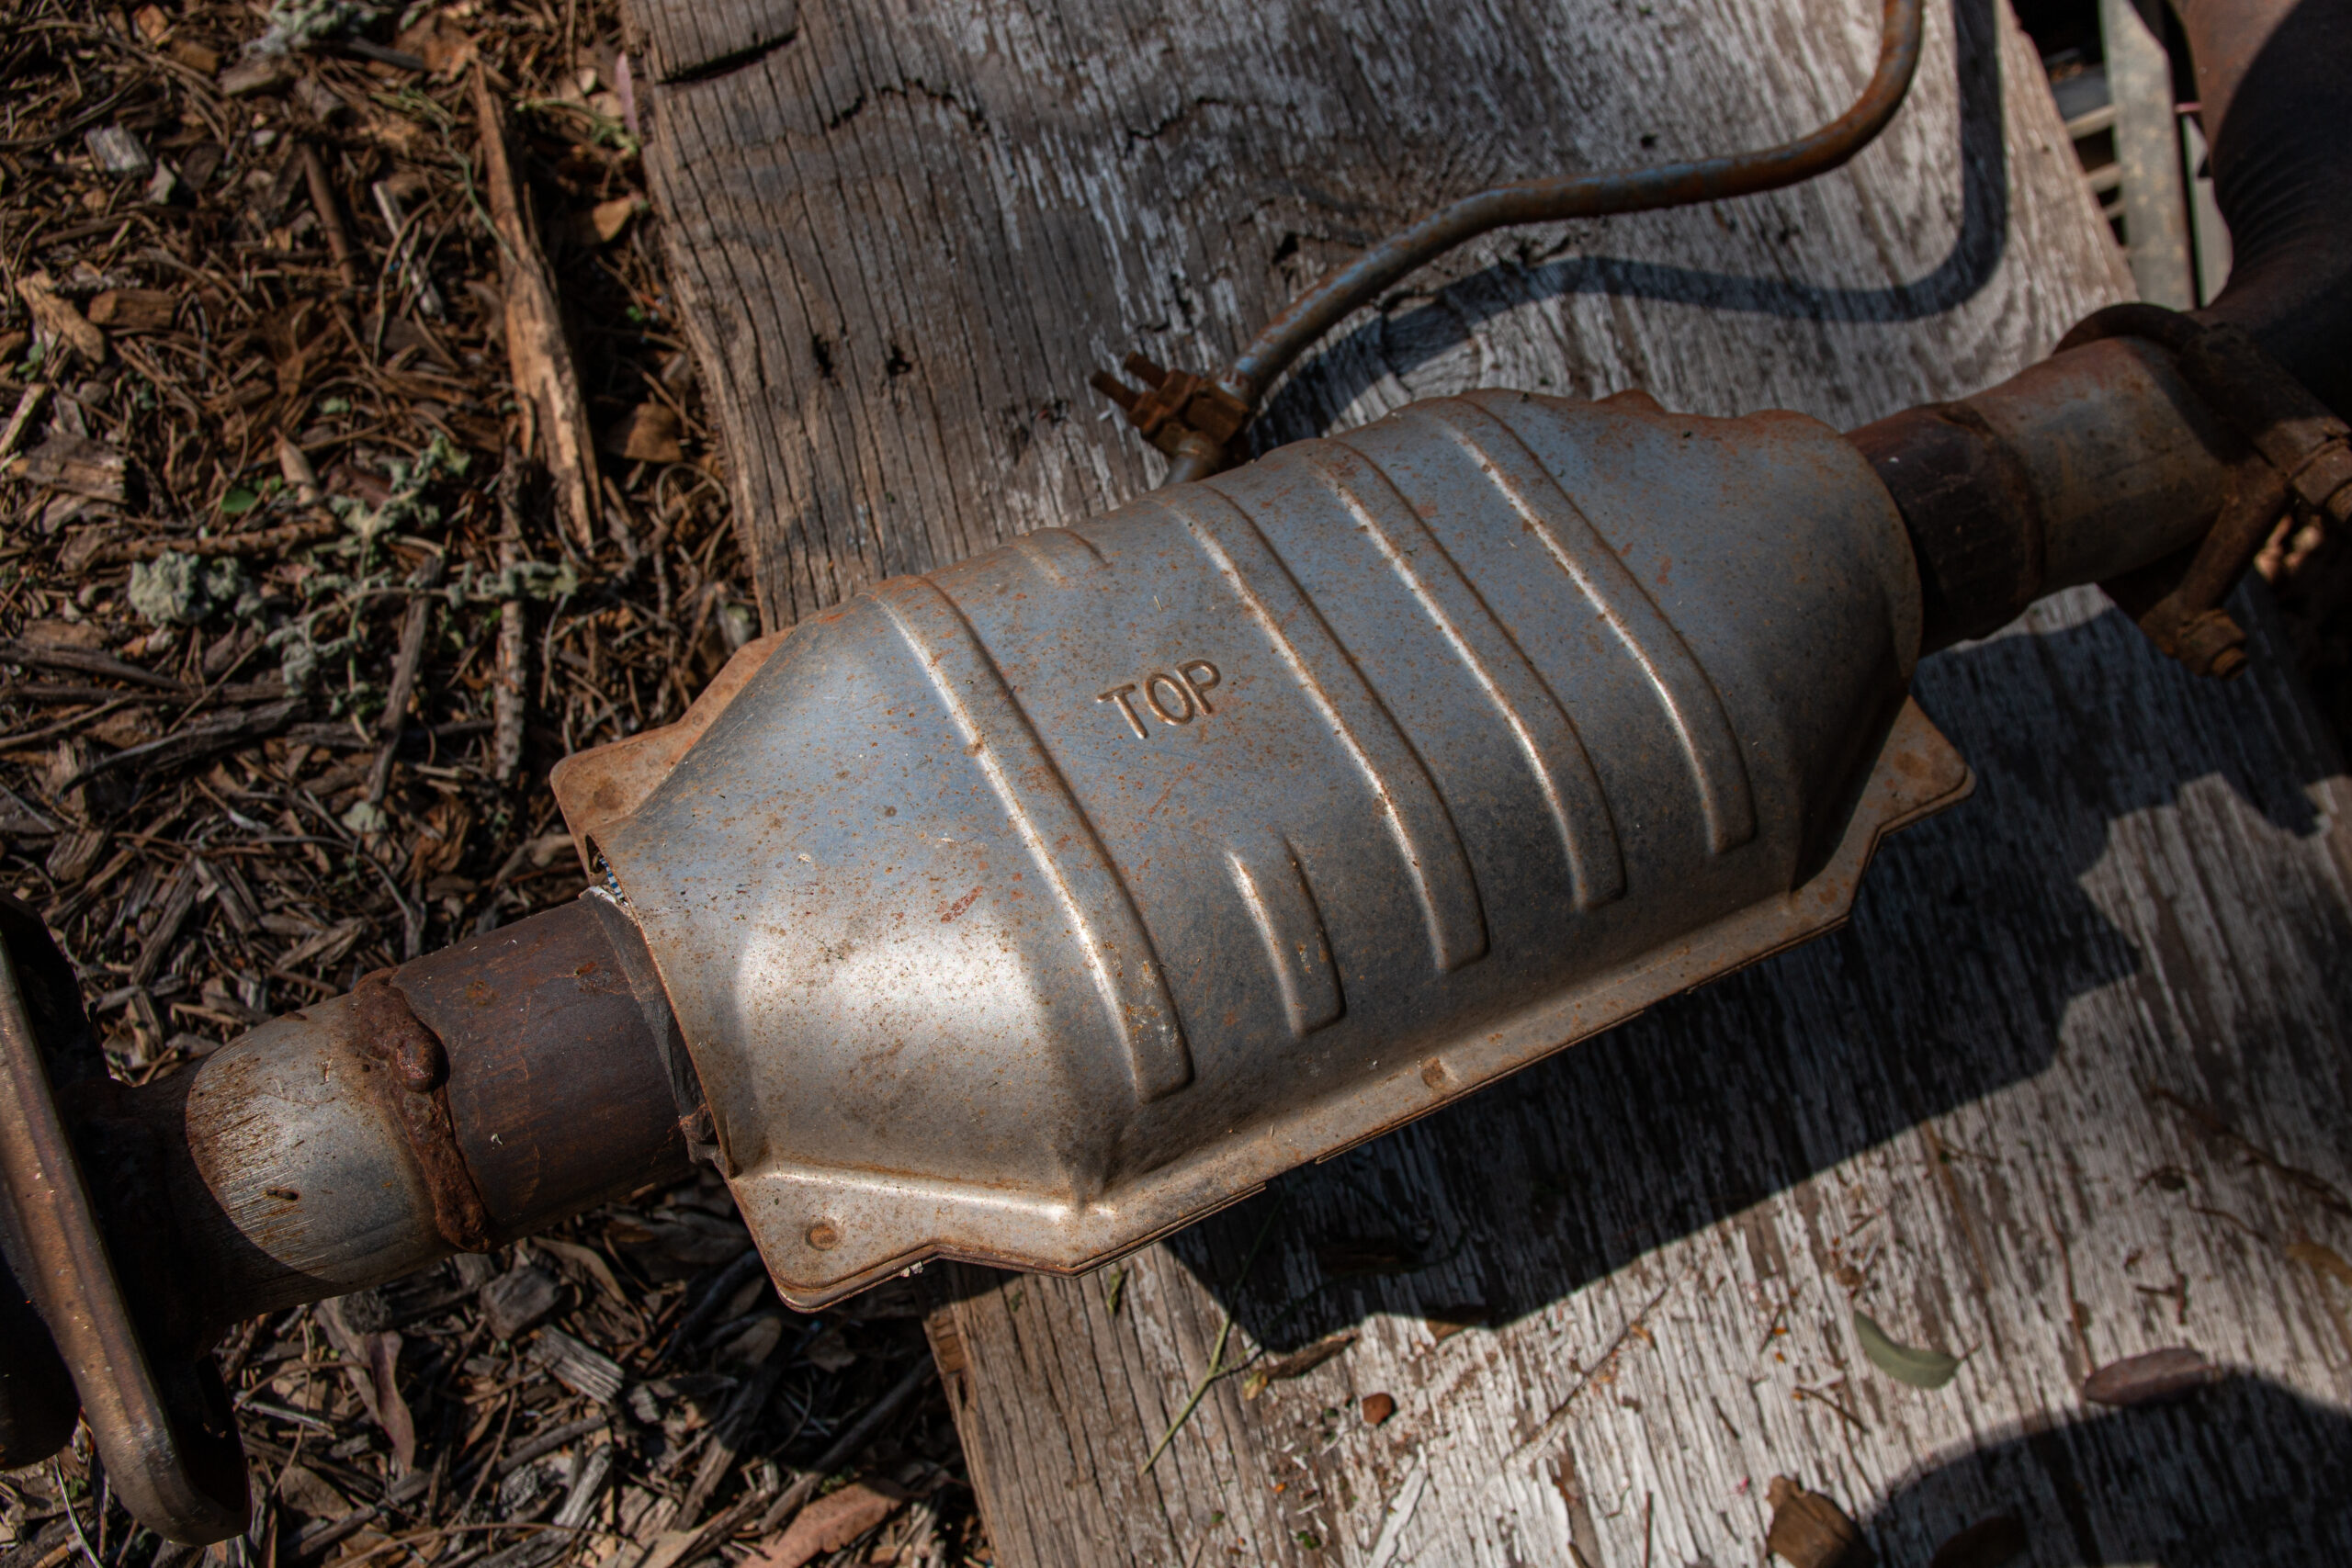 A Catalytic Converter, removed from a vehicle sitting on the ground.